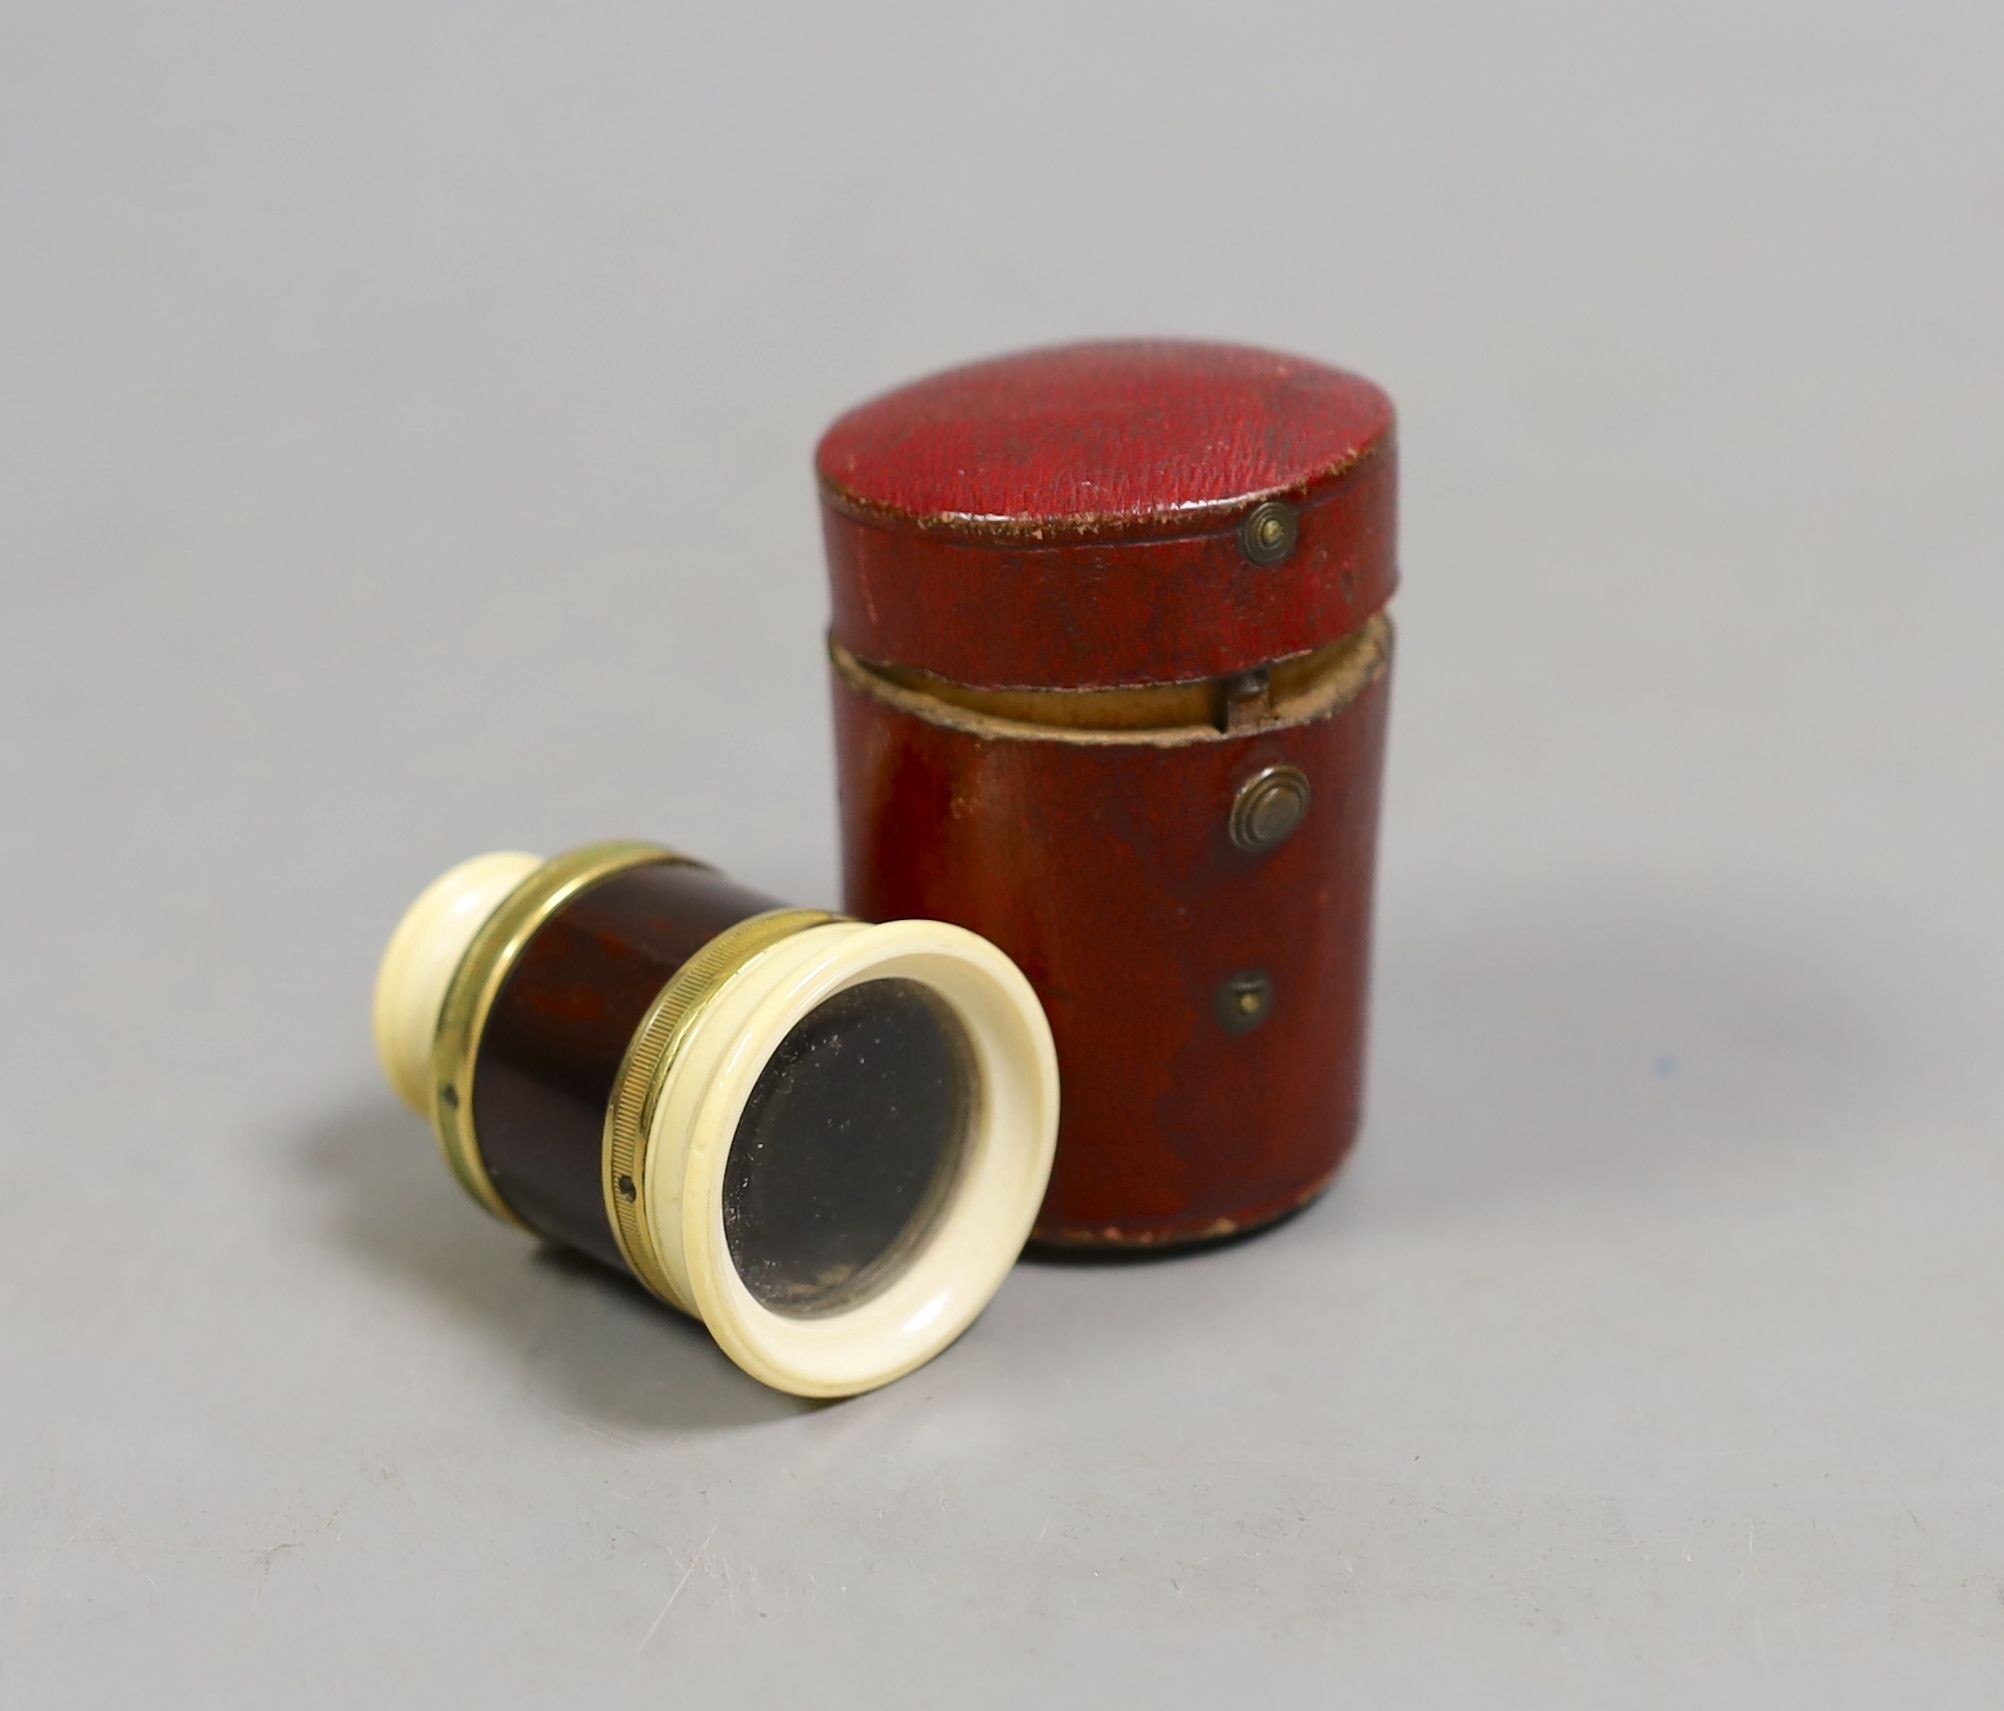 A 19th century ivory and tortoiseshell monocular in red leather case., Monocular 4.5 cms high, case 5.5 cms high.